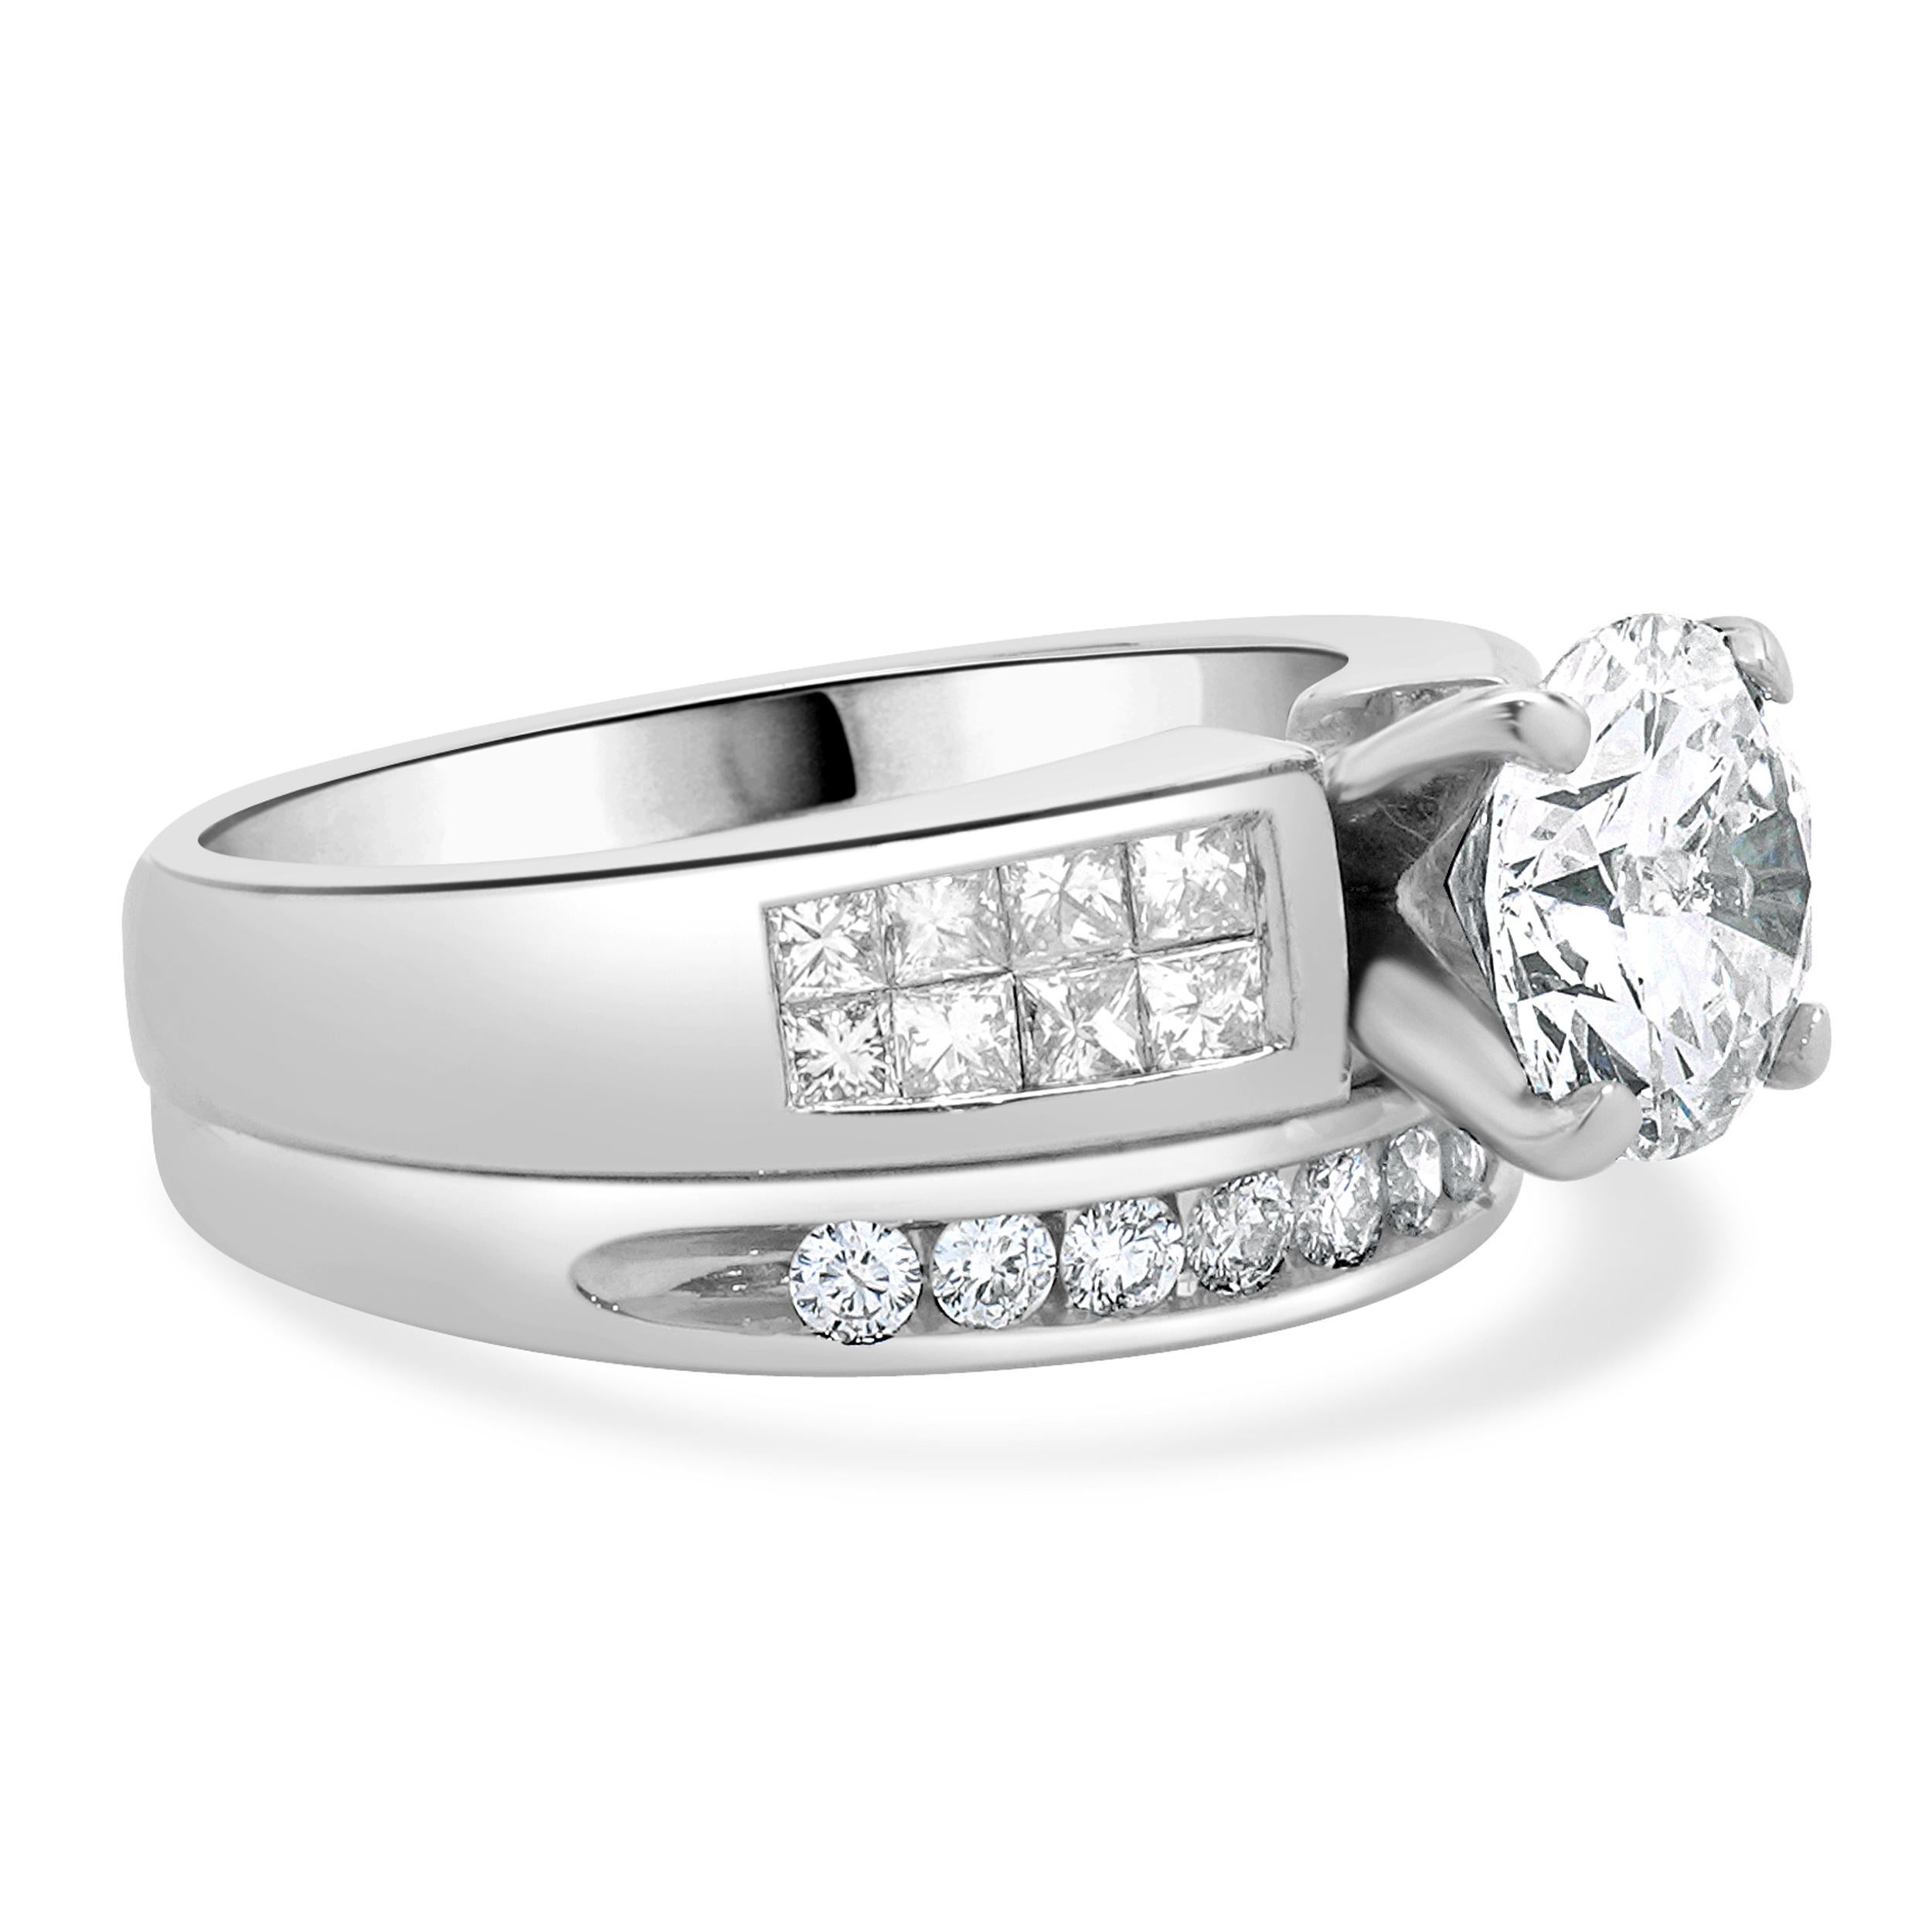 Designer: custom
Material: 14K white gold
Diamond: 1 round brilliant cut = 1.60ct
Color: H
Clarity: I1
Diamond: 10 round brilliant  & 16 princess cut = 0.68cttw
Color: H
Clarity: SI1-2
Dimensions: ring top measures 10mm wide
Ring Size: 6.5